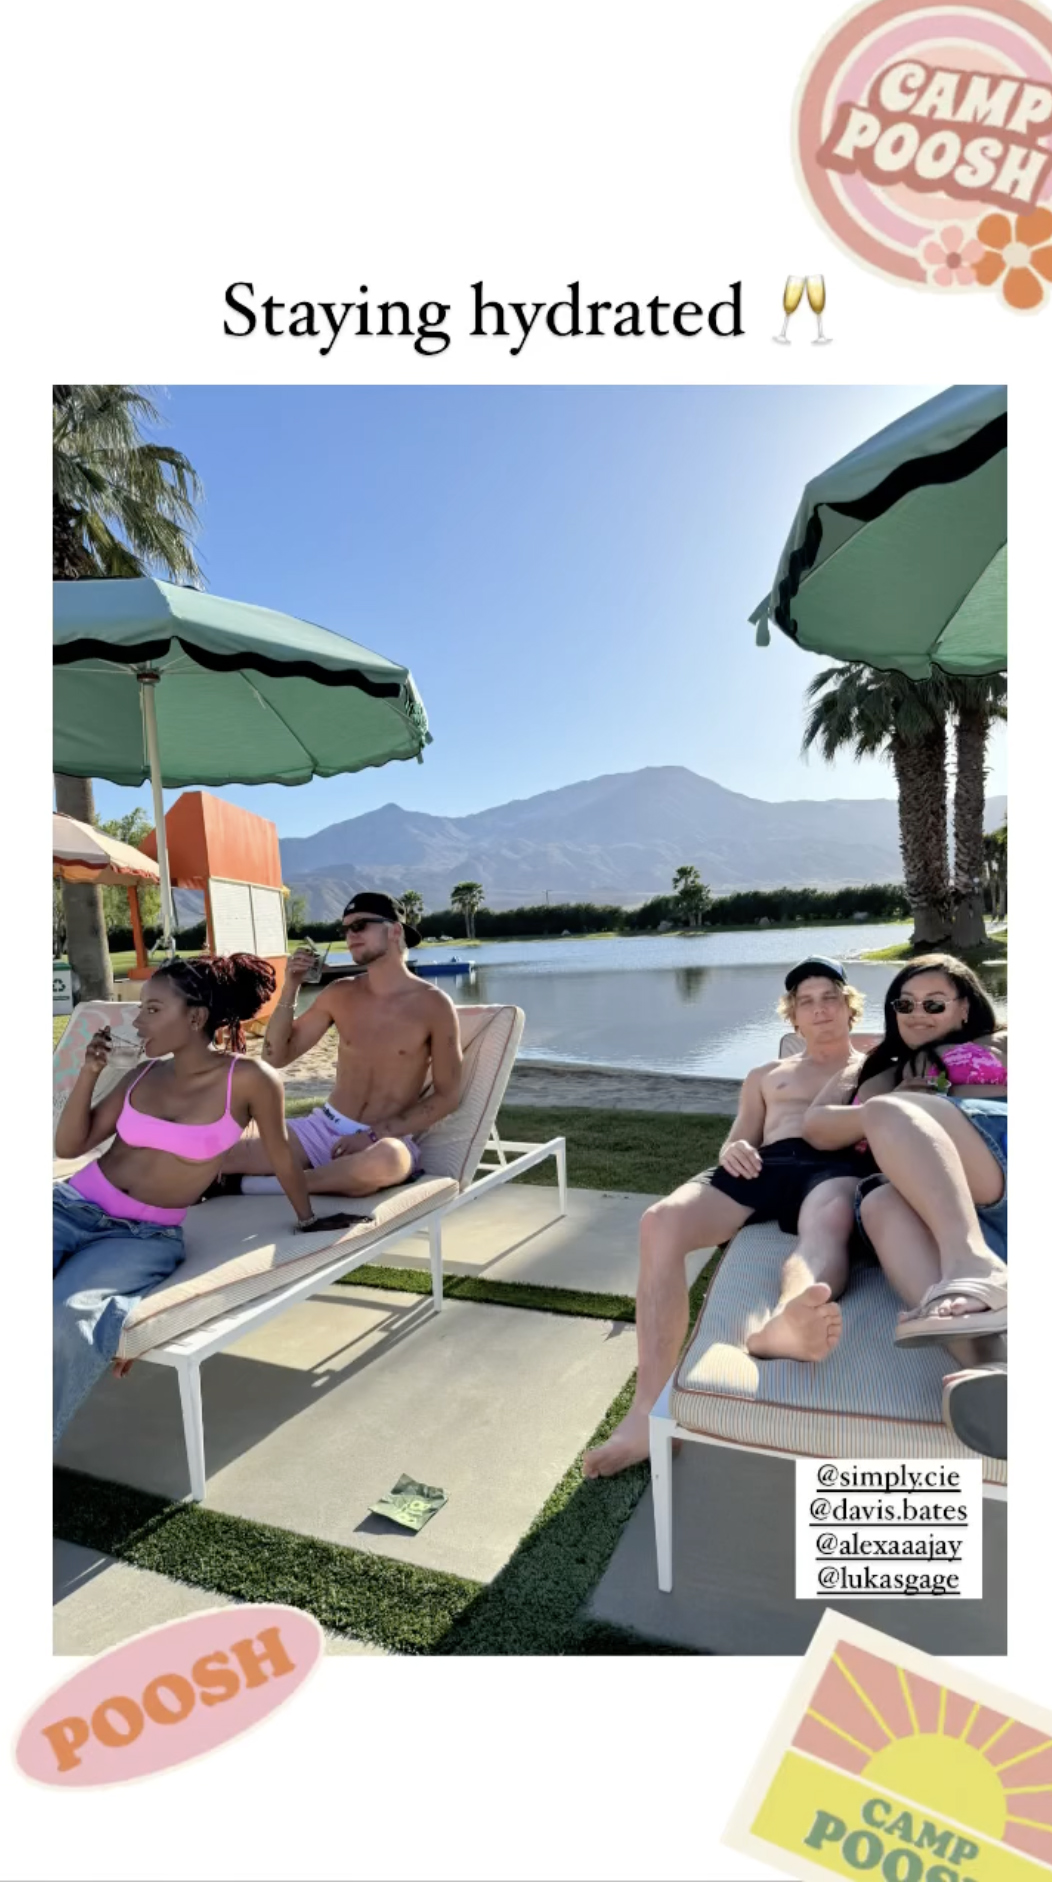 Poosh reposted a pic of Lukas Gage, Alexa Jay, Cierra Wright, and Davis Bates relaxing poolside with the scenic desert landscape in the background